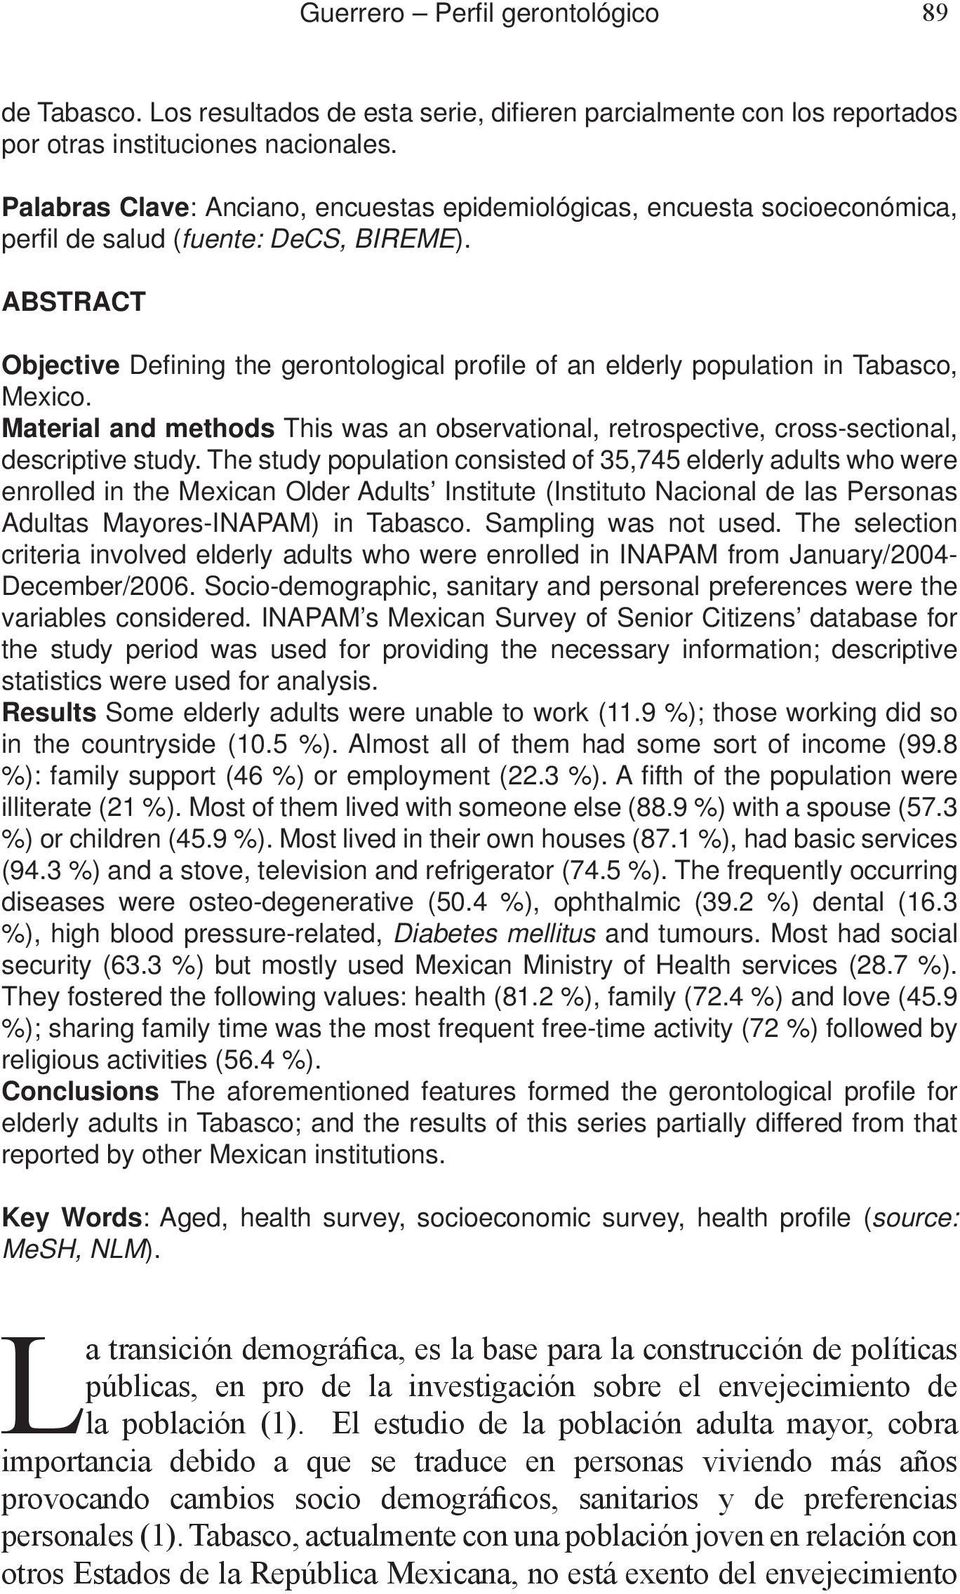 ABSTRACT Objective Defining the gerontological profi le of an elderly population in Tabasco, Mexico. Material and methods This was an observational, retrospective, cross-sectional, descriptive study.